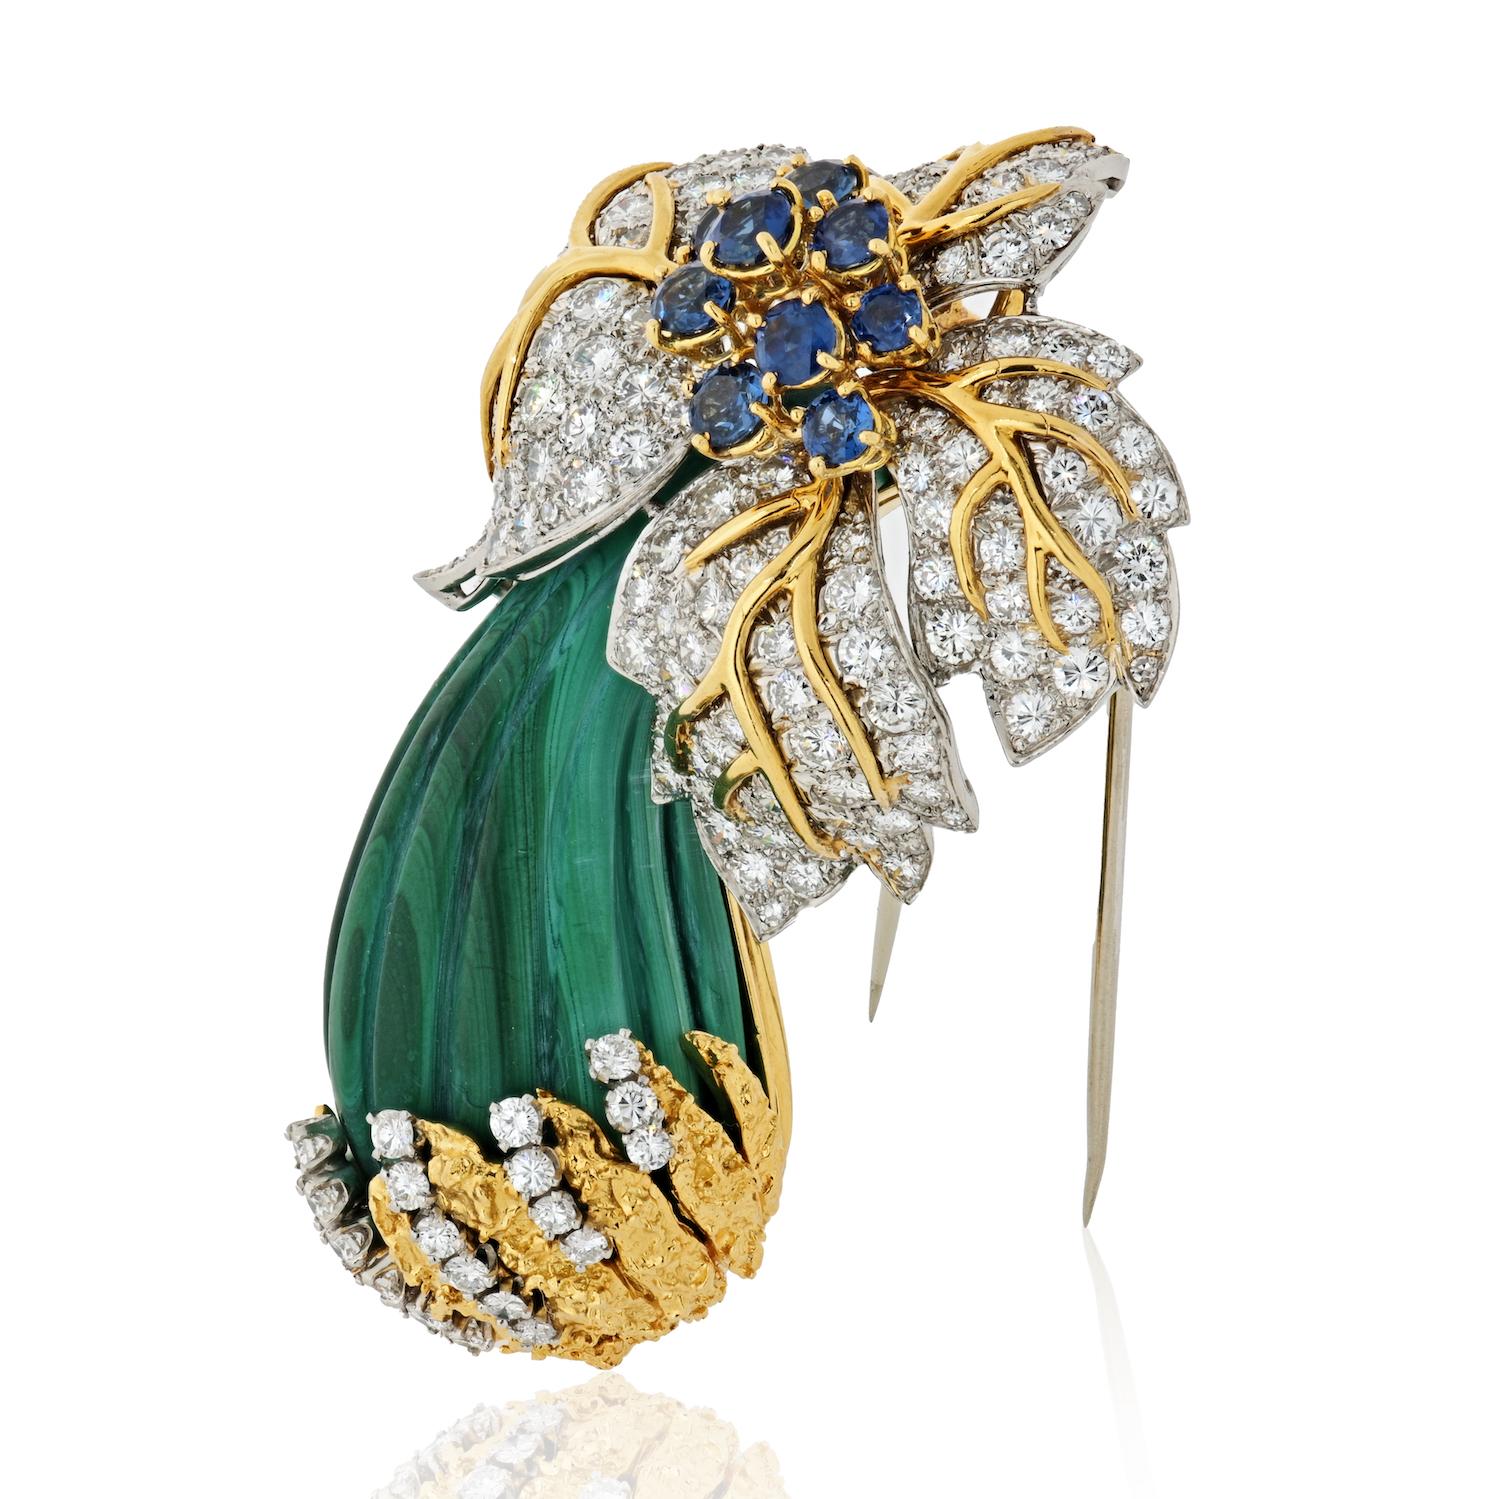 Unique nature inspired diamond and sapphire mushroom brooch. The top of the mushroom is pave set with round brilliant cut diamonds and 10 blue sapphires. 

The stem is made out of a green carved malachite finished by yellow gold grass and pave set